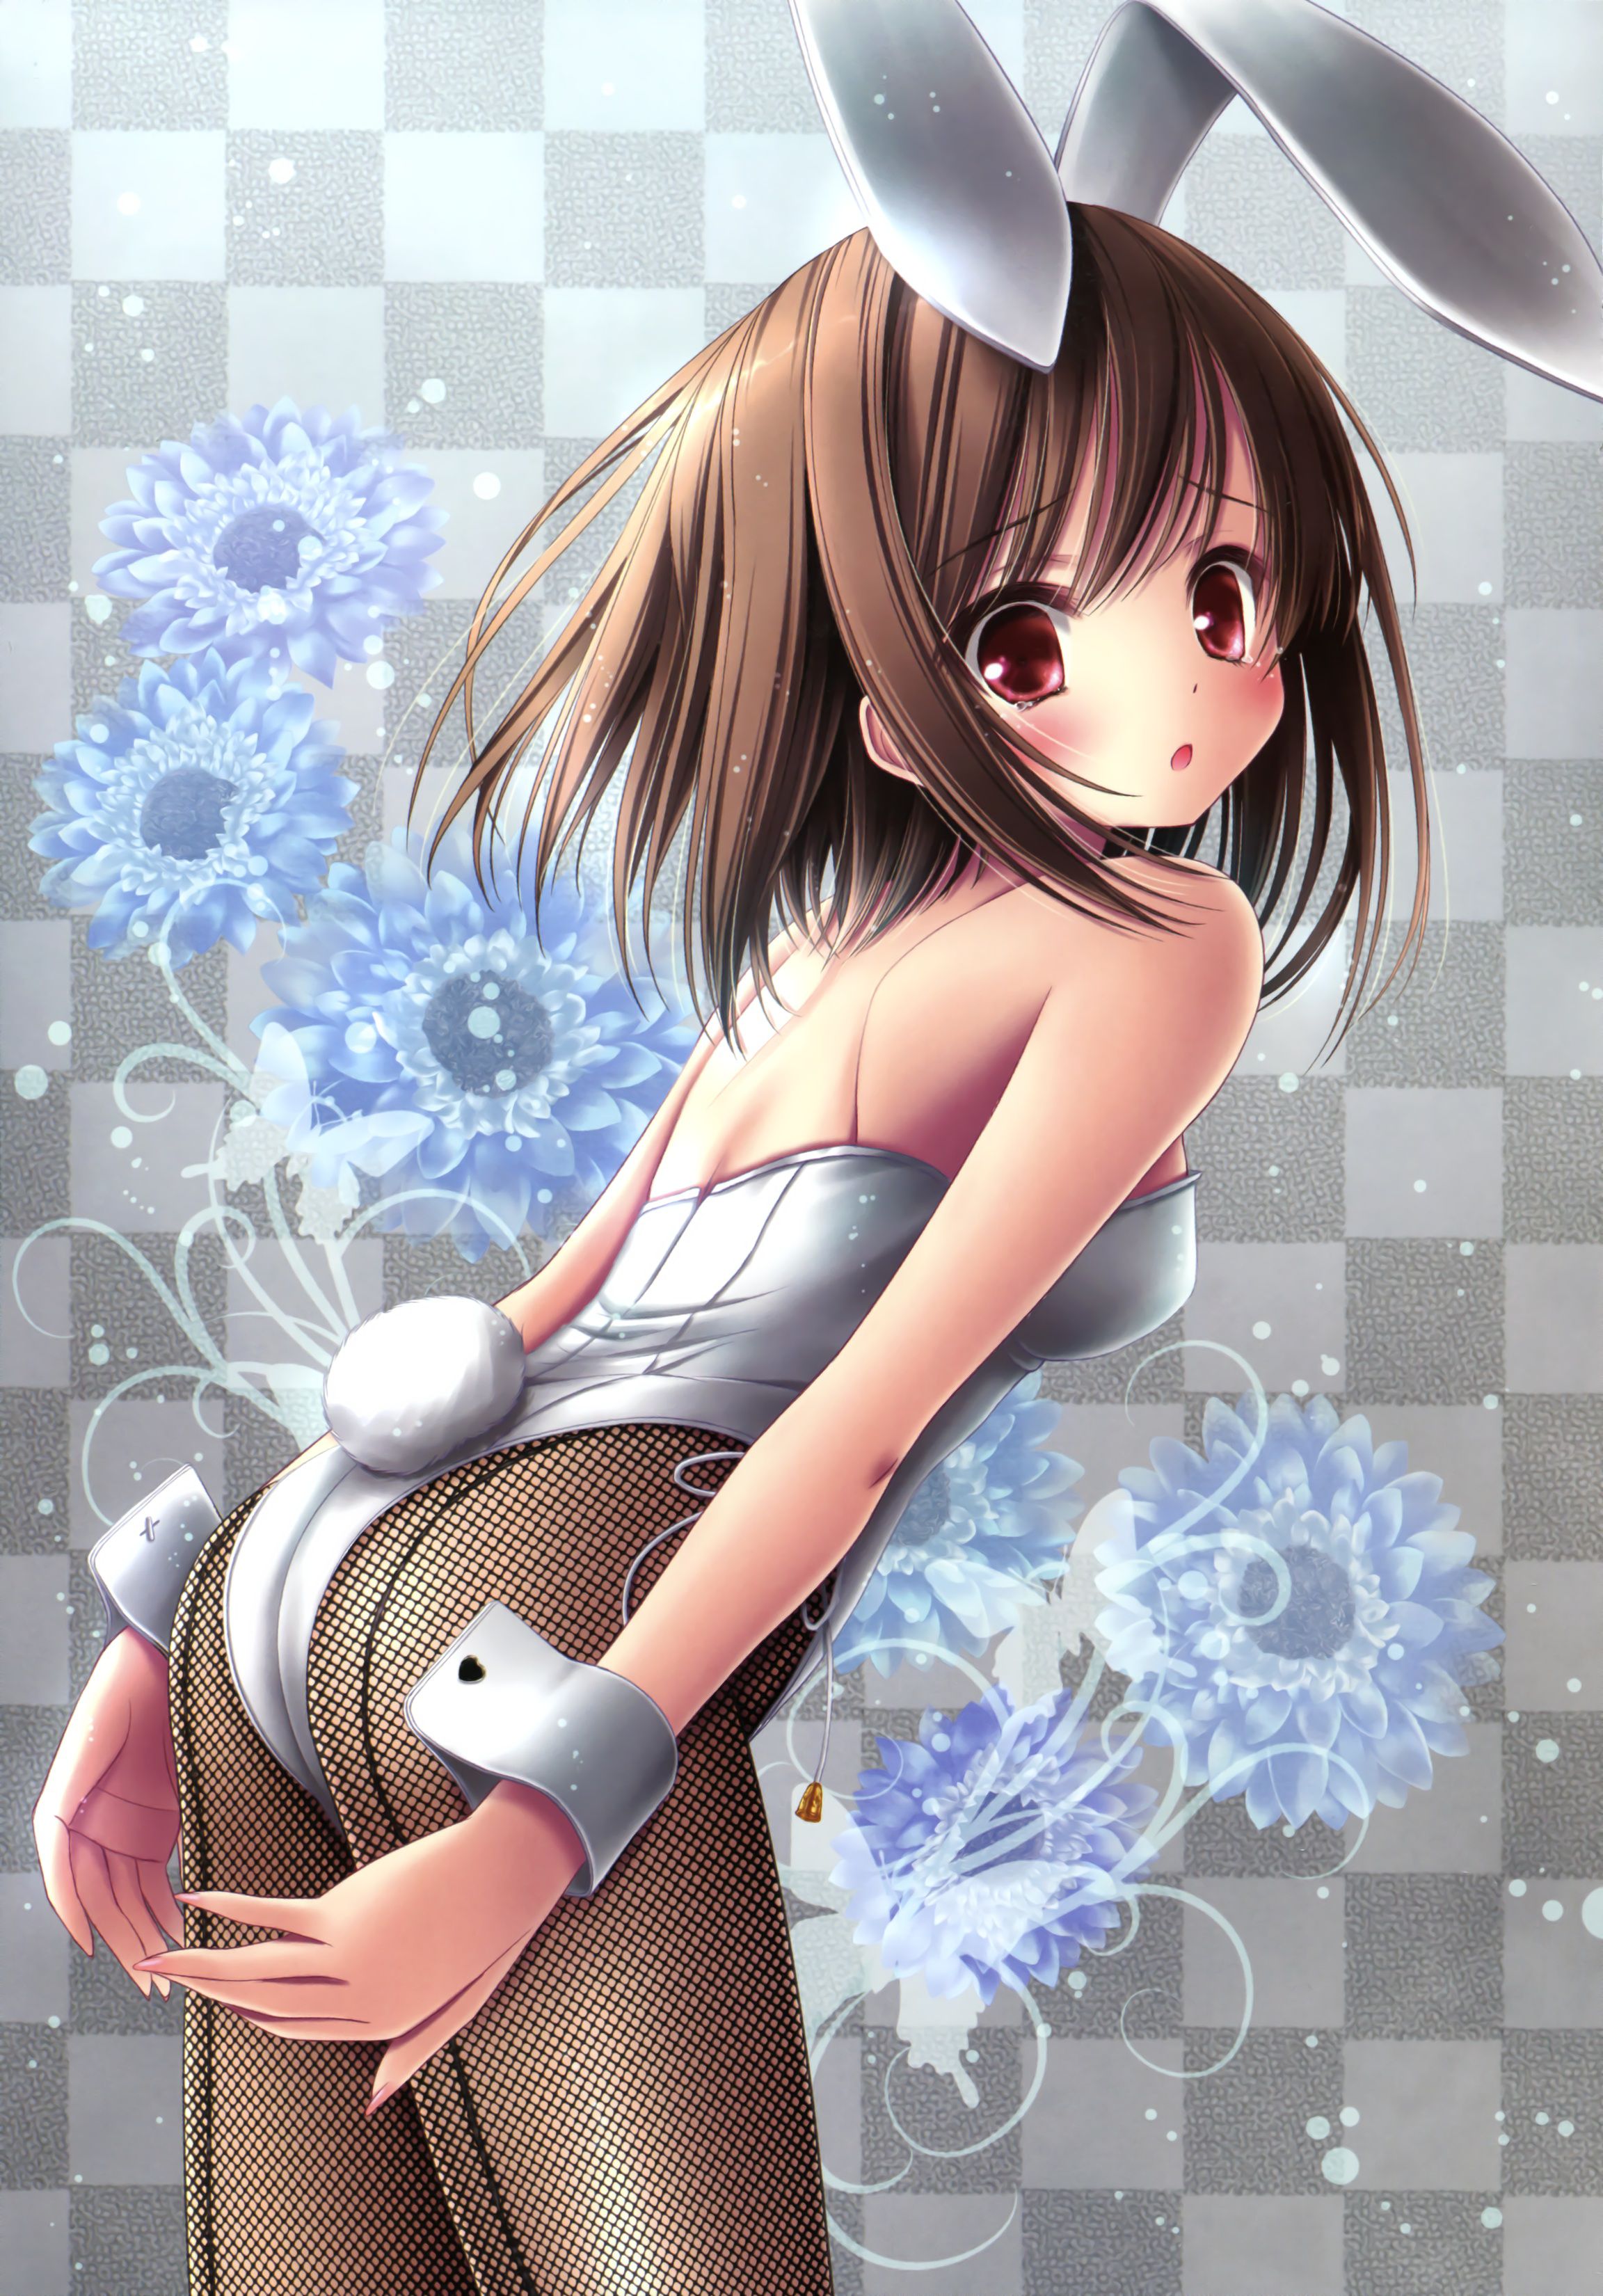 Two-dimensional Bunny girl erotic pictures. This would take away! 24